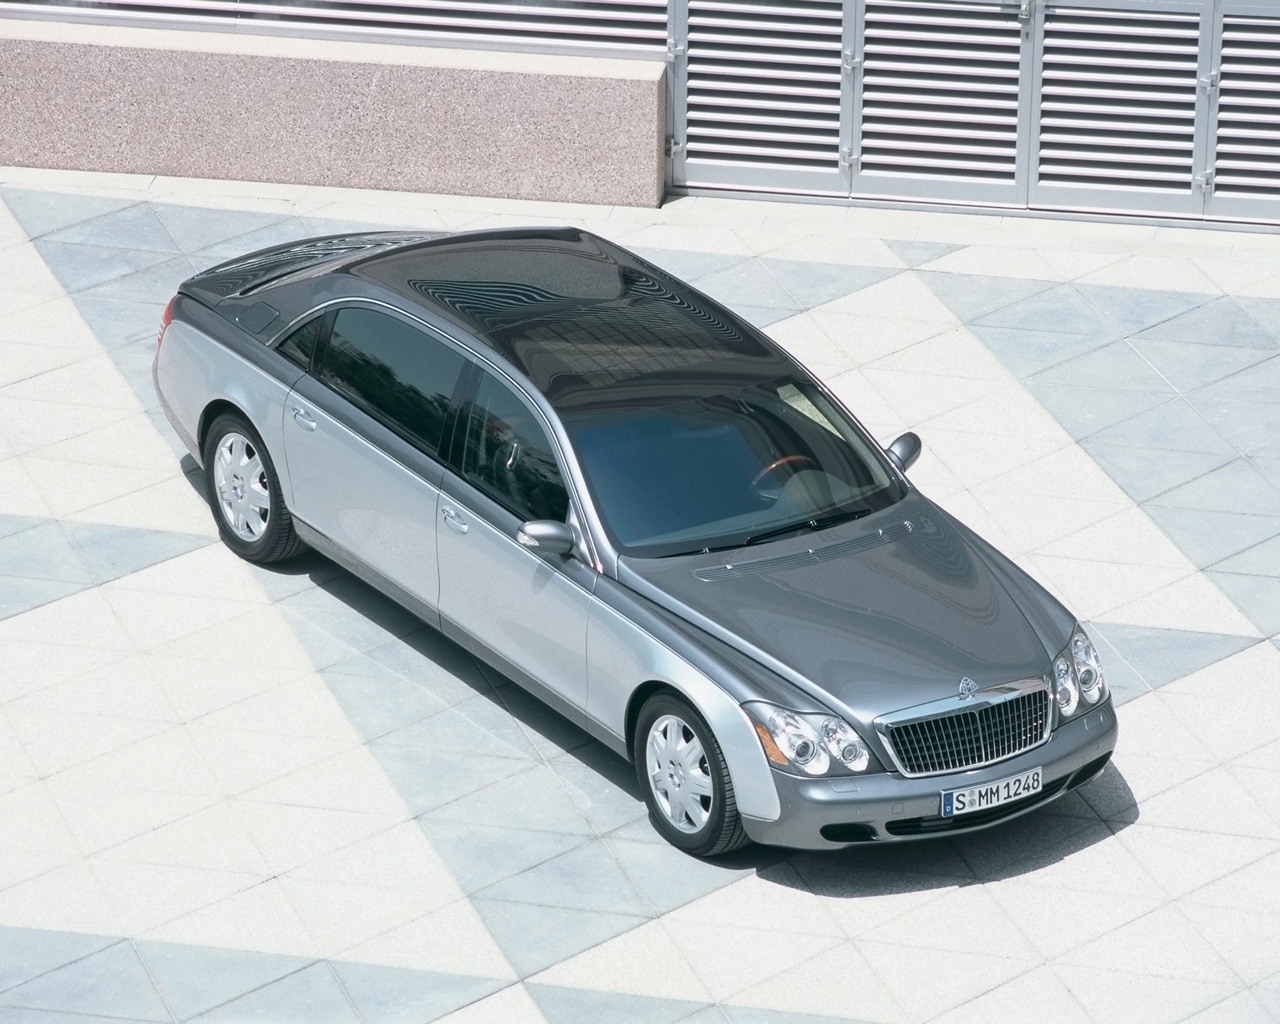 Maybach 62 Outside Right Front for 1280 x 1024 resolution